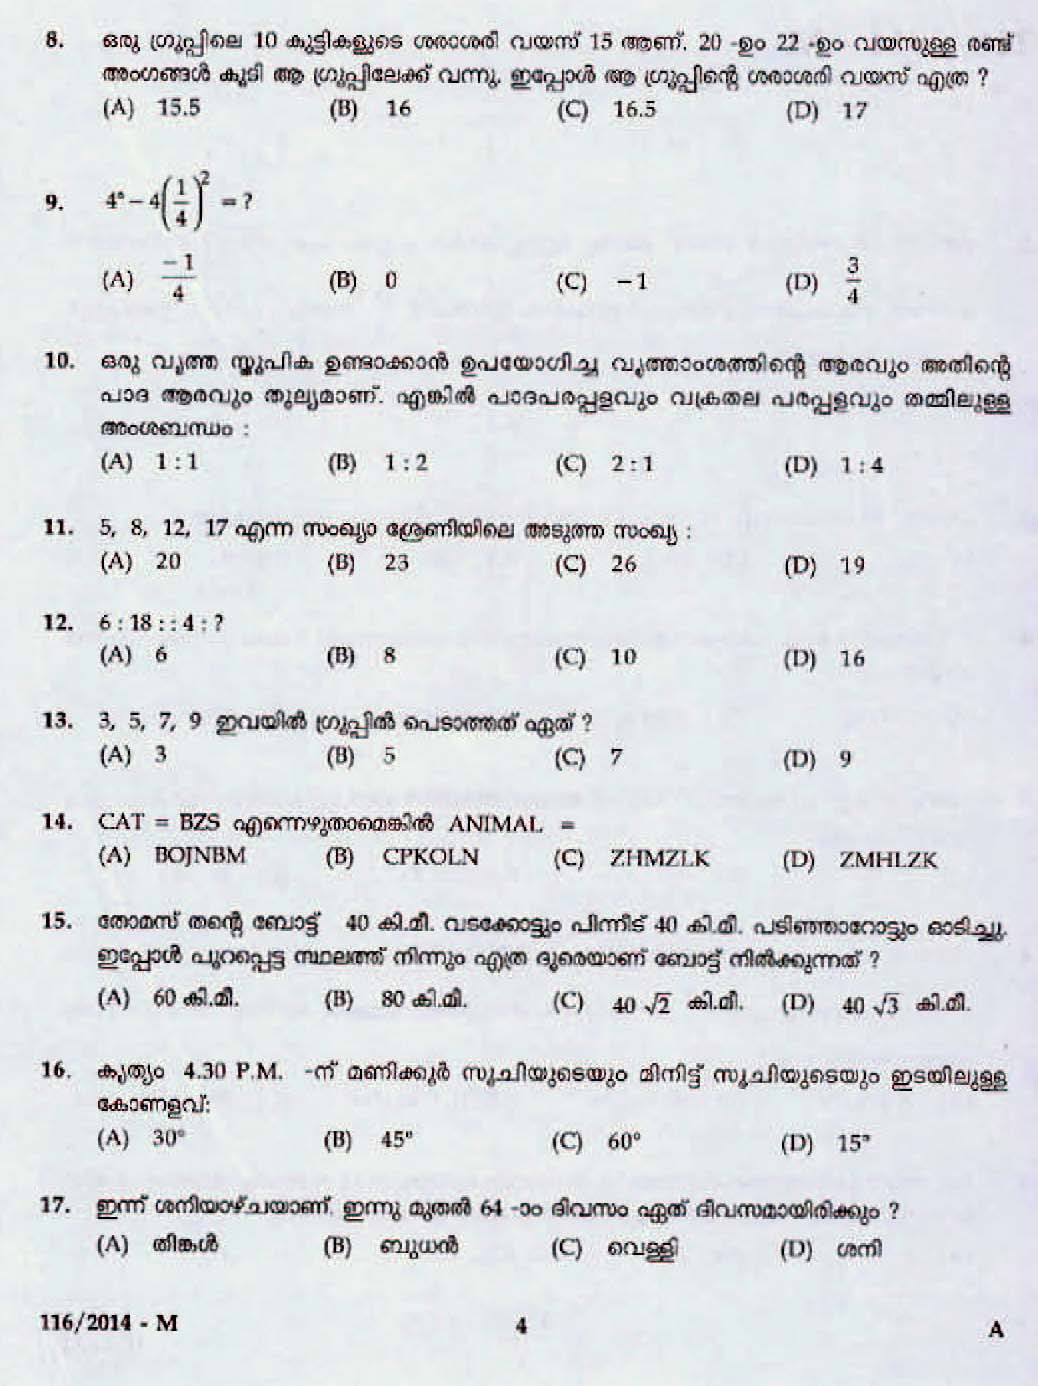 LD Clerk Various All Districts Question Paper Malayalam 2014 Paper Code 1162014 M 2